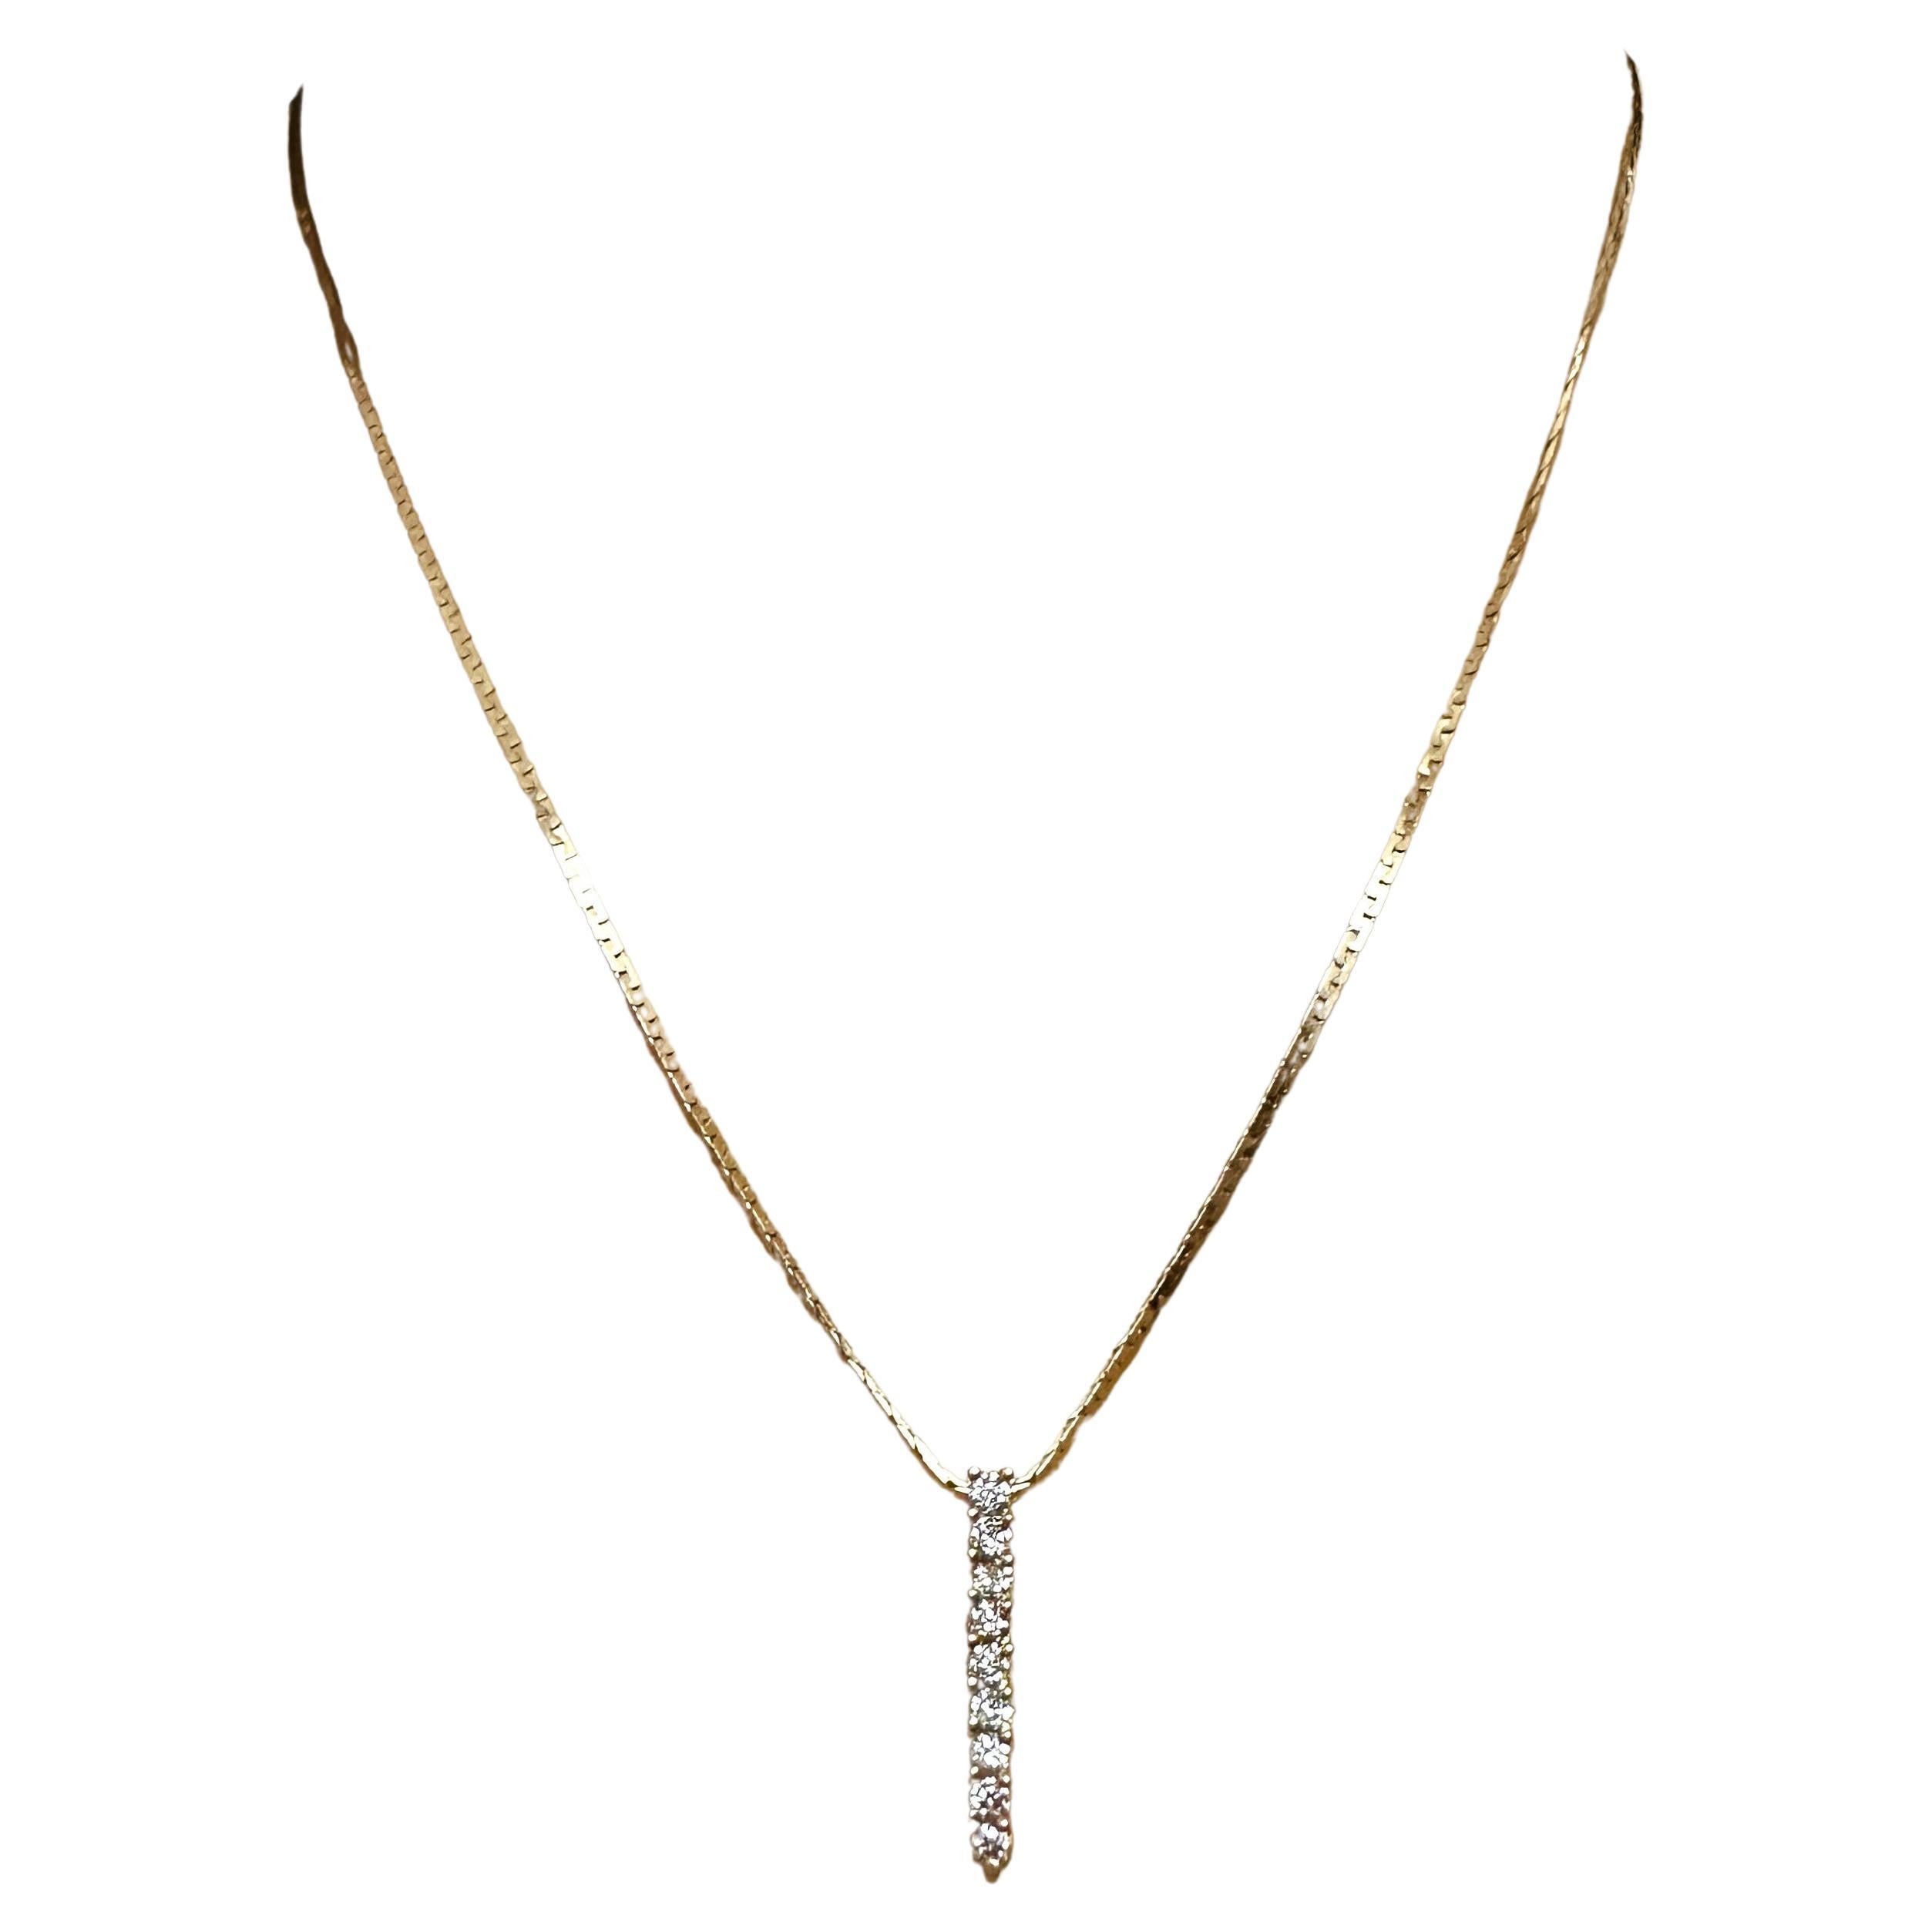 I just love this necklace!  The design is just so cool.  It has 9 brilliant cut diamonds measuring approximately 2.4 x 2.4 x 1.8 mm.  To my untrained eye the color appears to be H-I.  They total approximately .54 carats.  The necklace is 16 inches